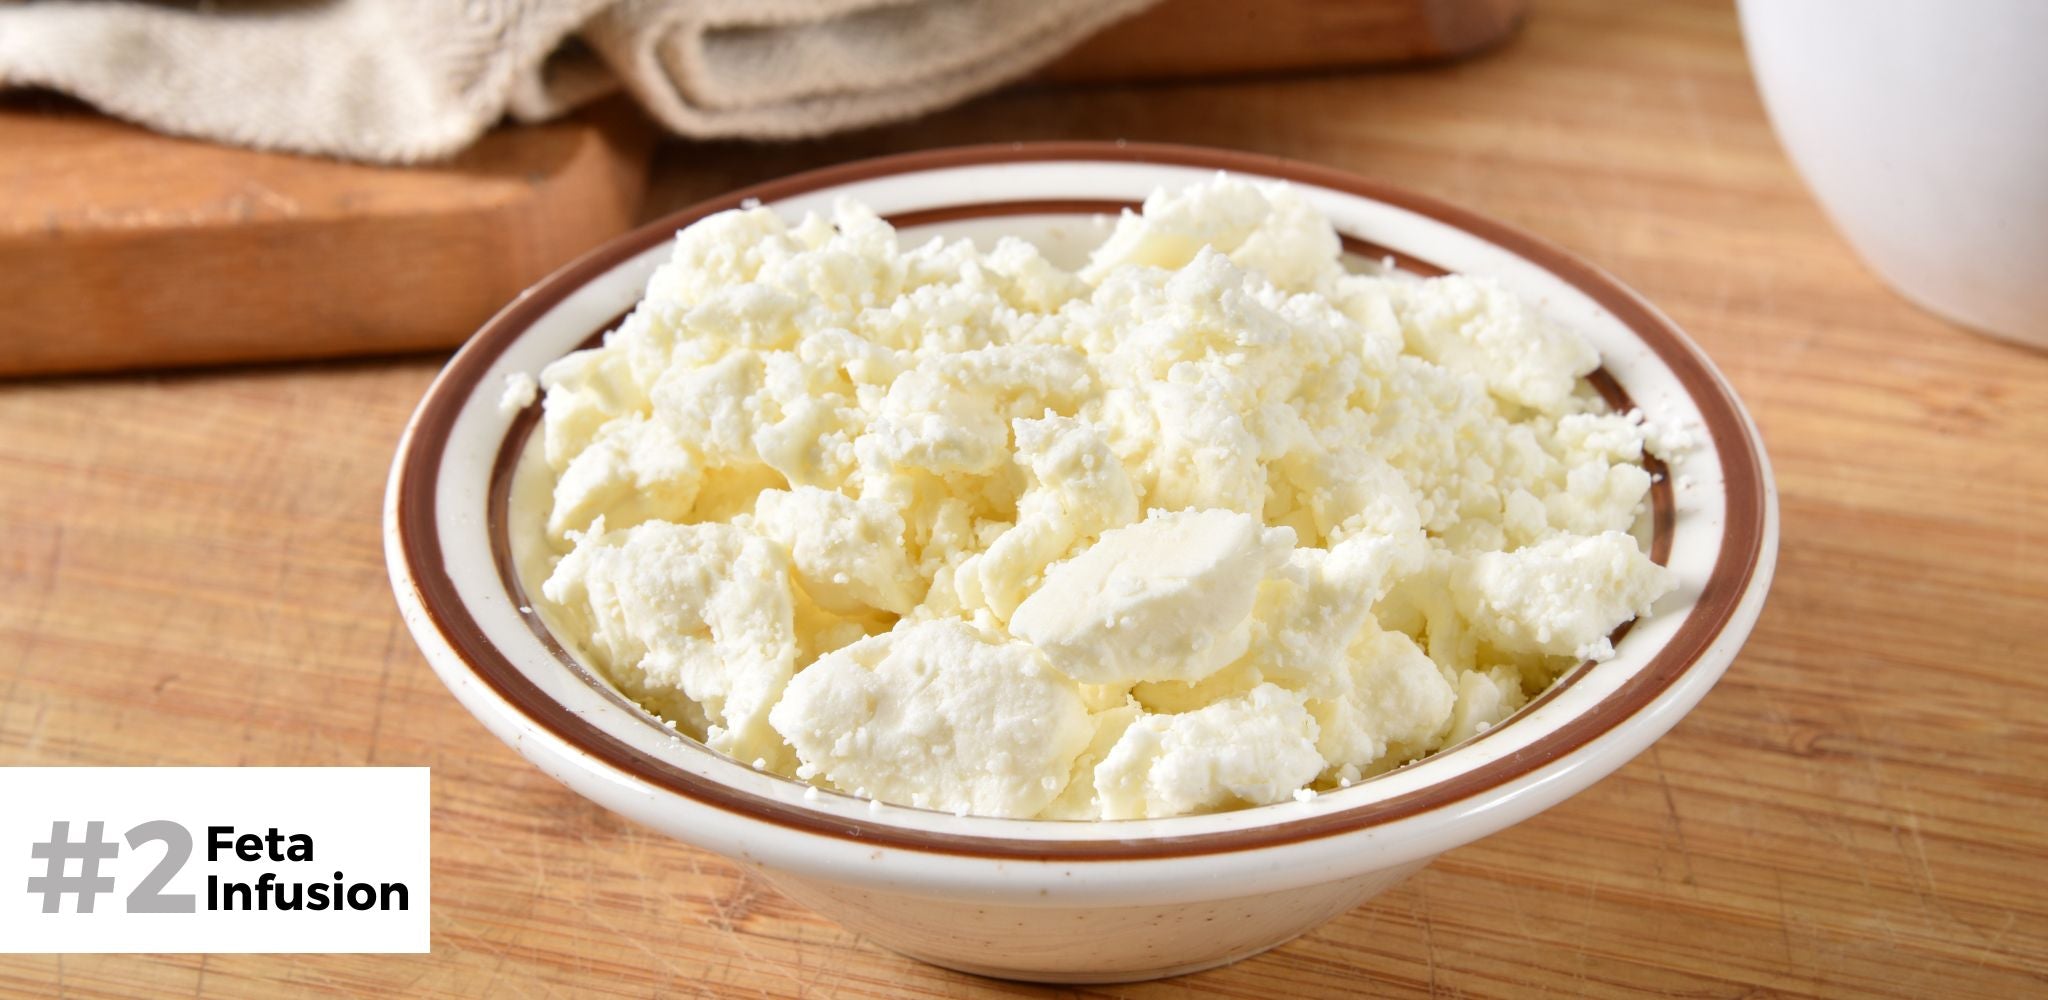 Crumbled Feta Cheese in a bowl with wooden background